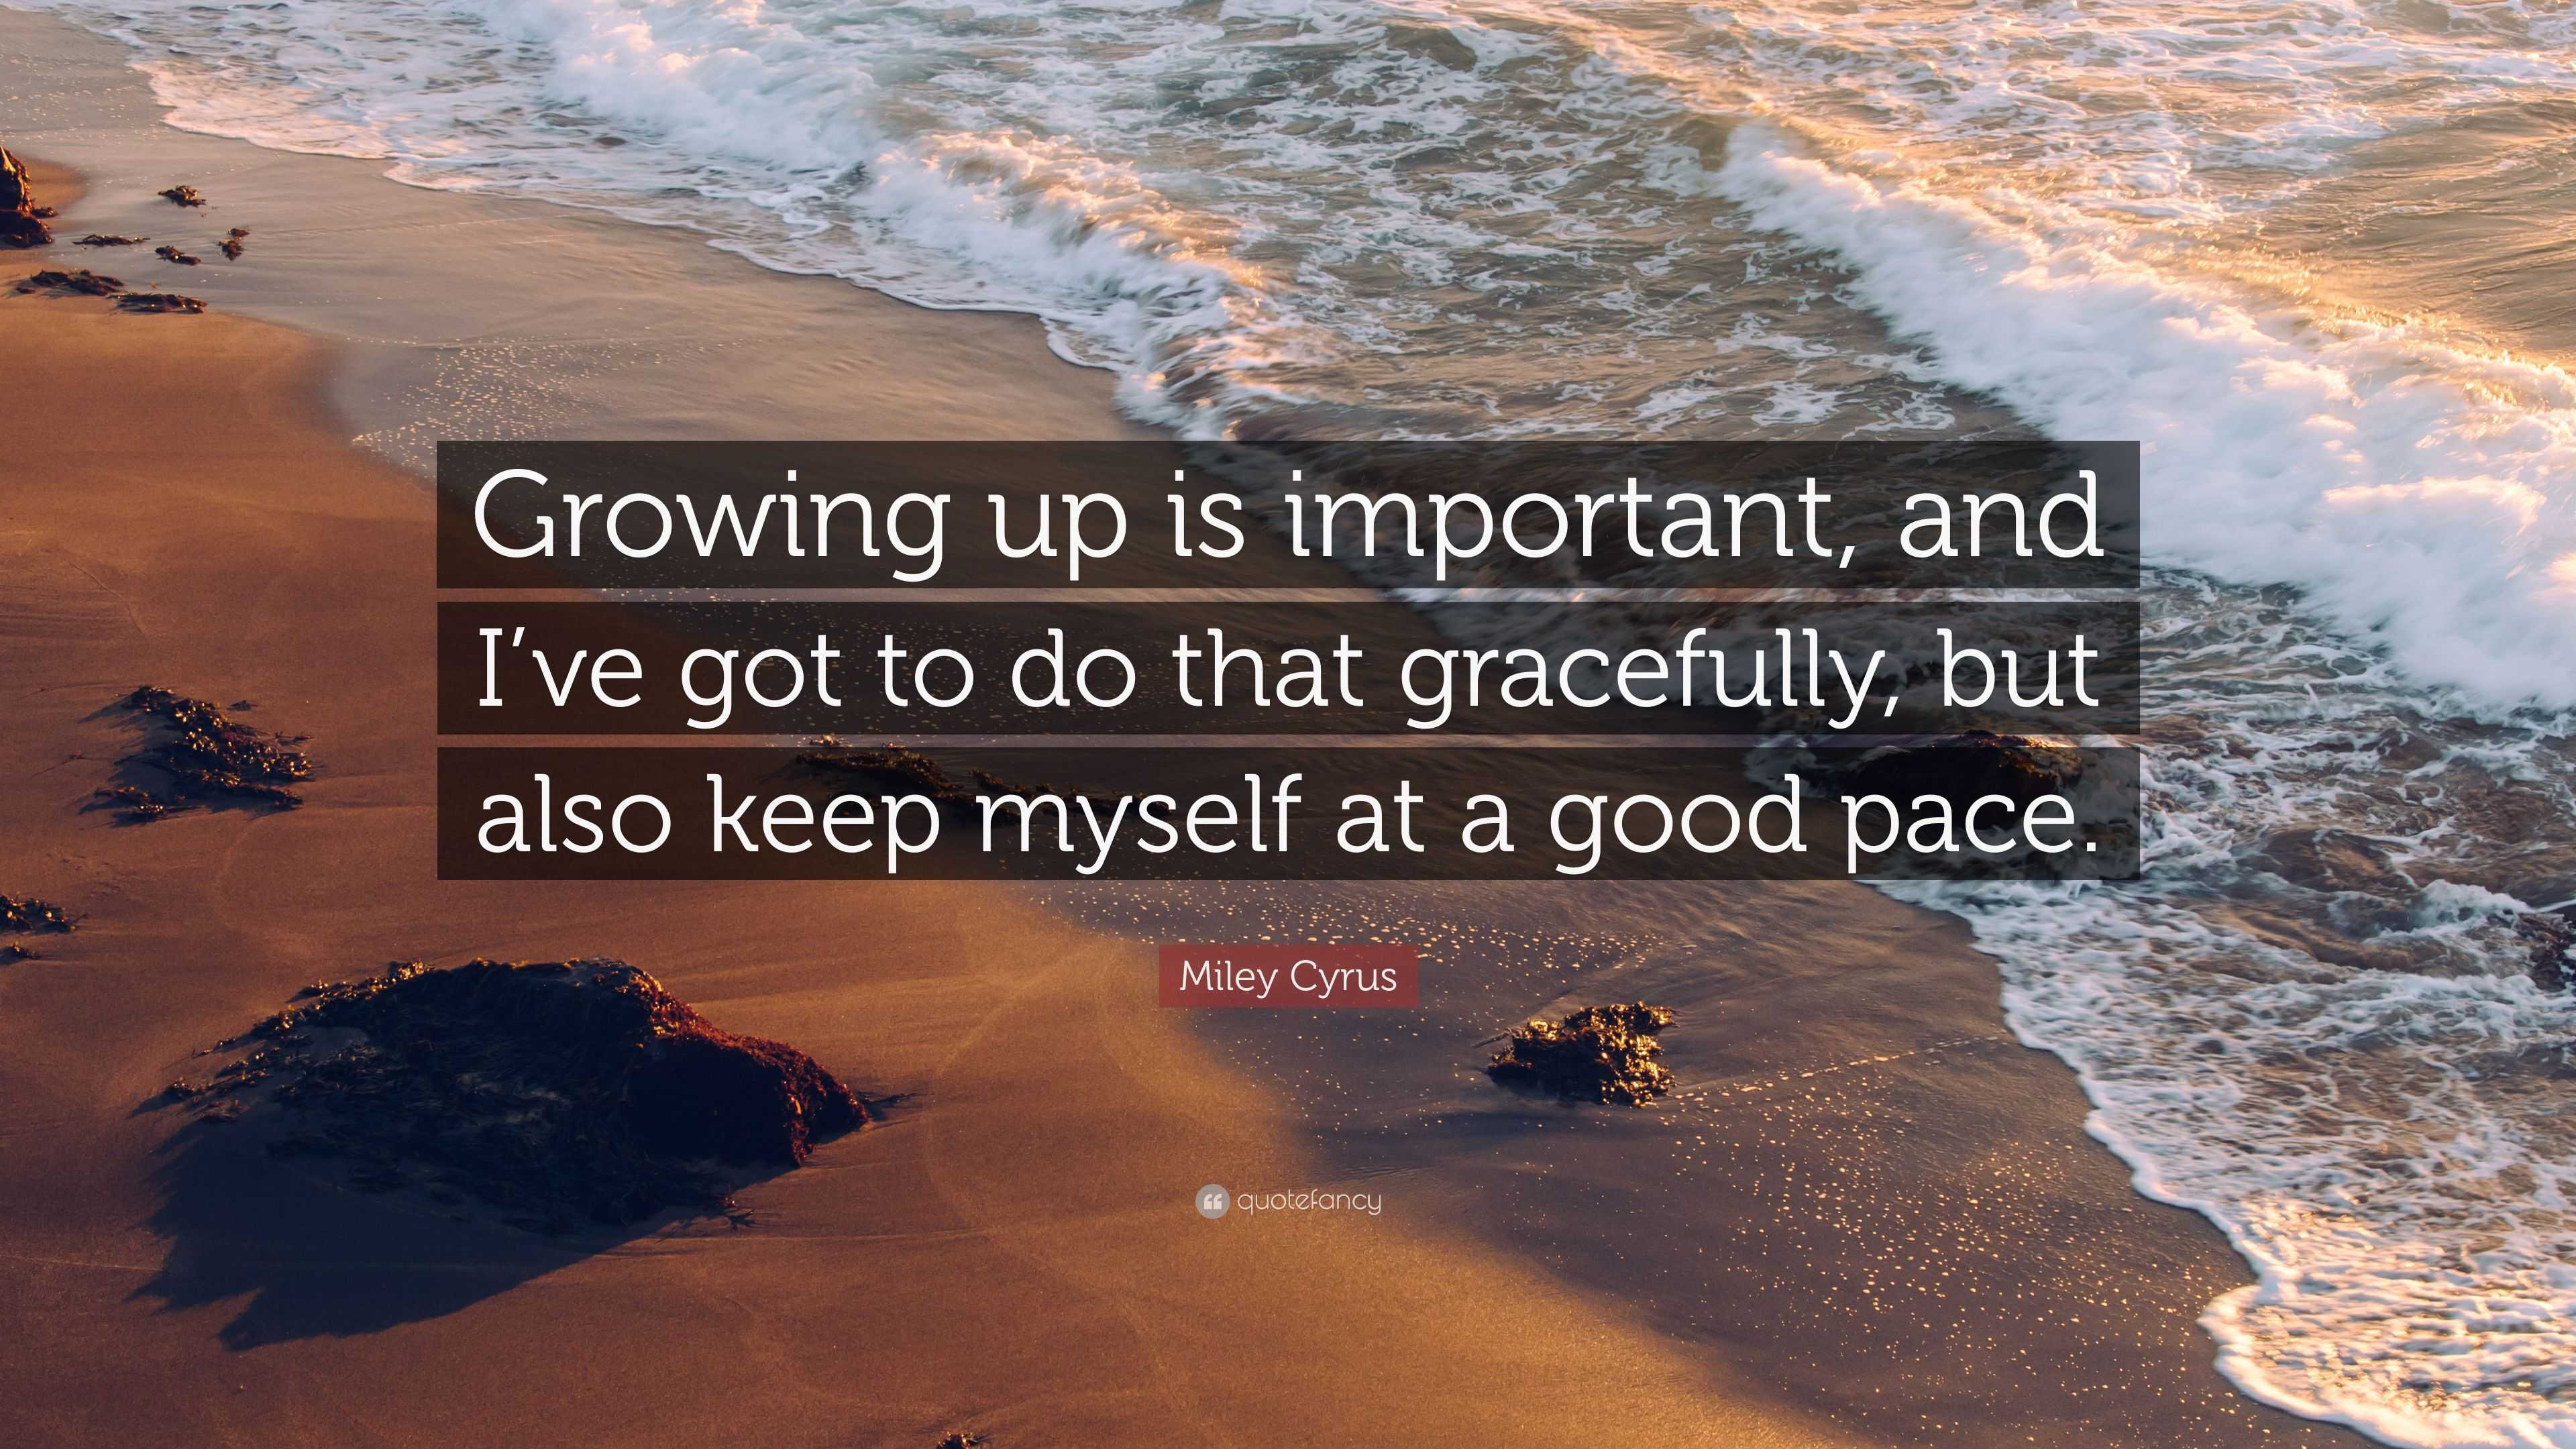 famous quotes about growing up